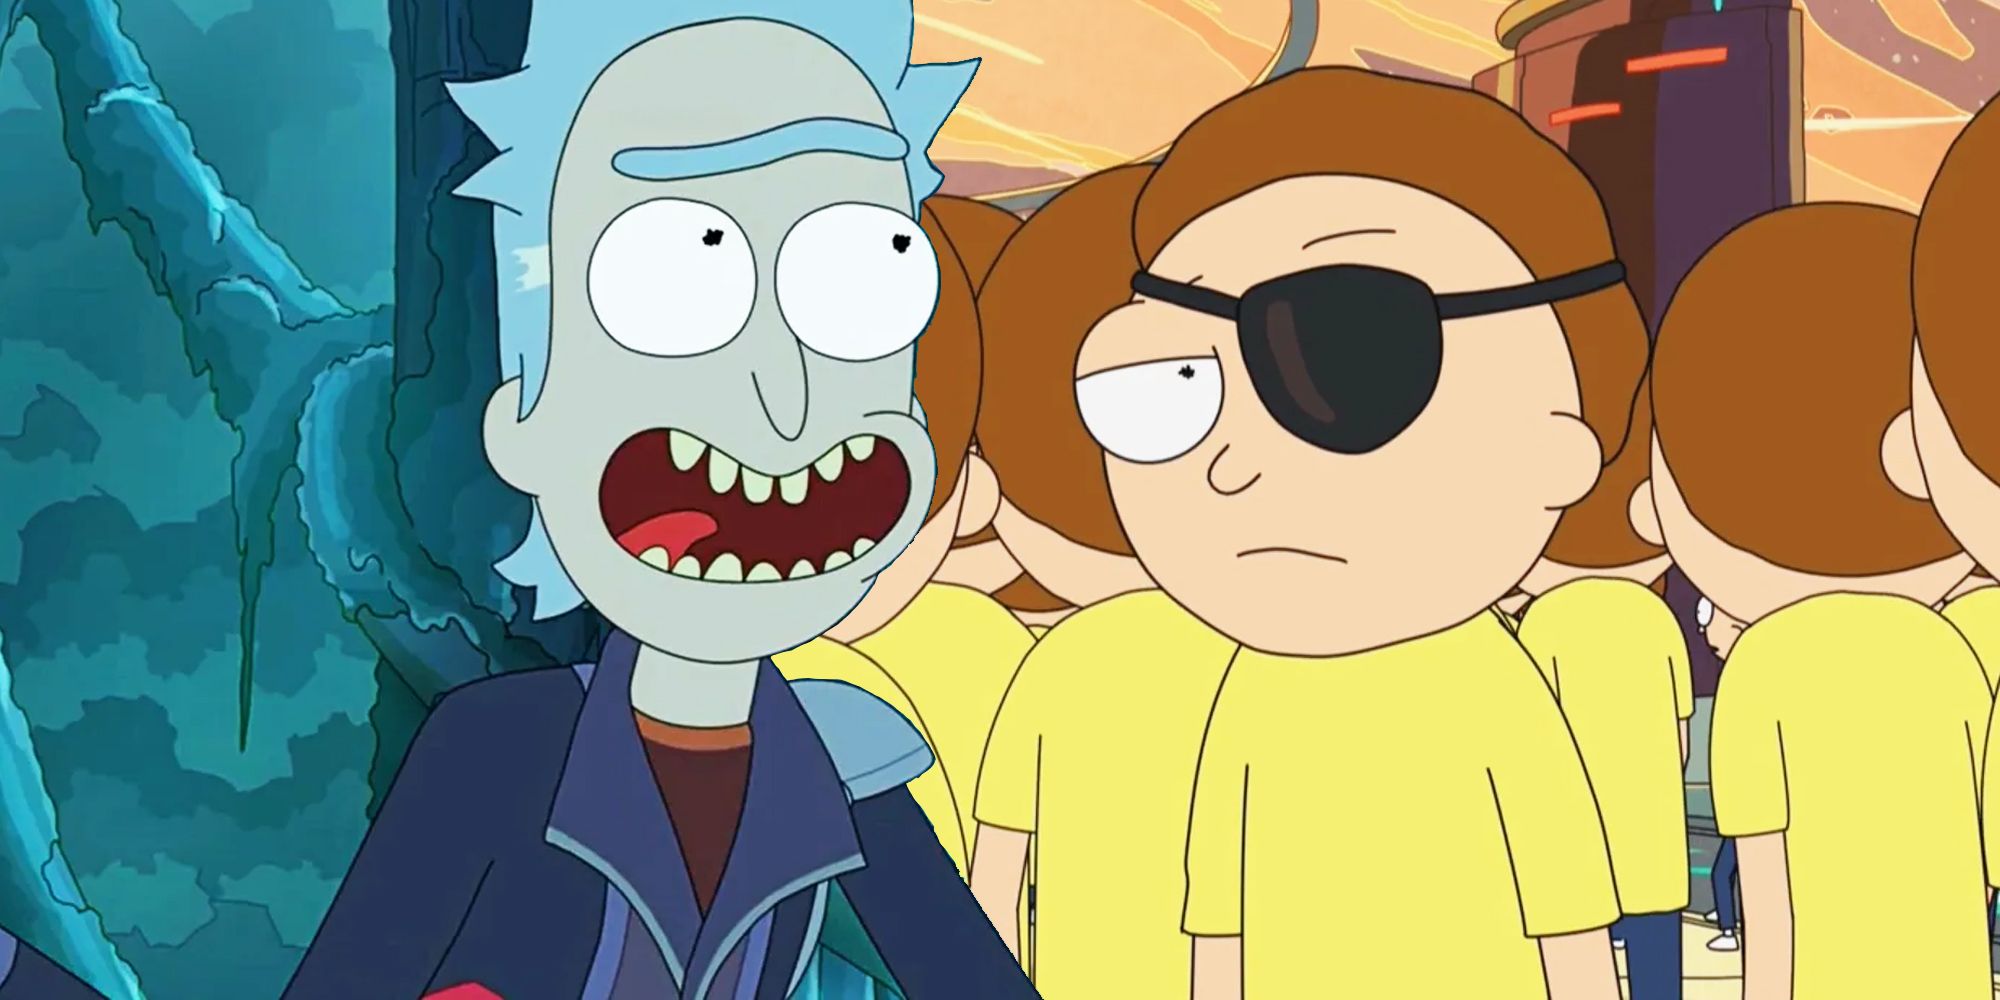 Rick Prime smiling next to Evil Morty looking intensely at the camera